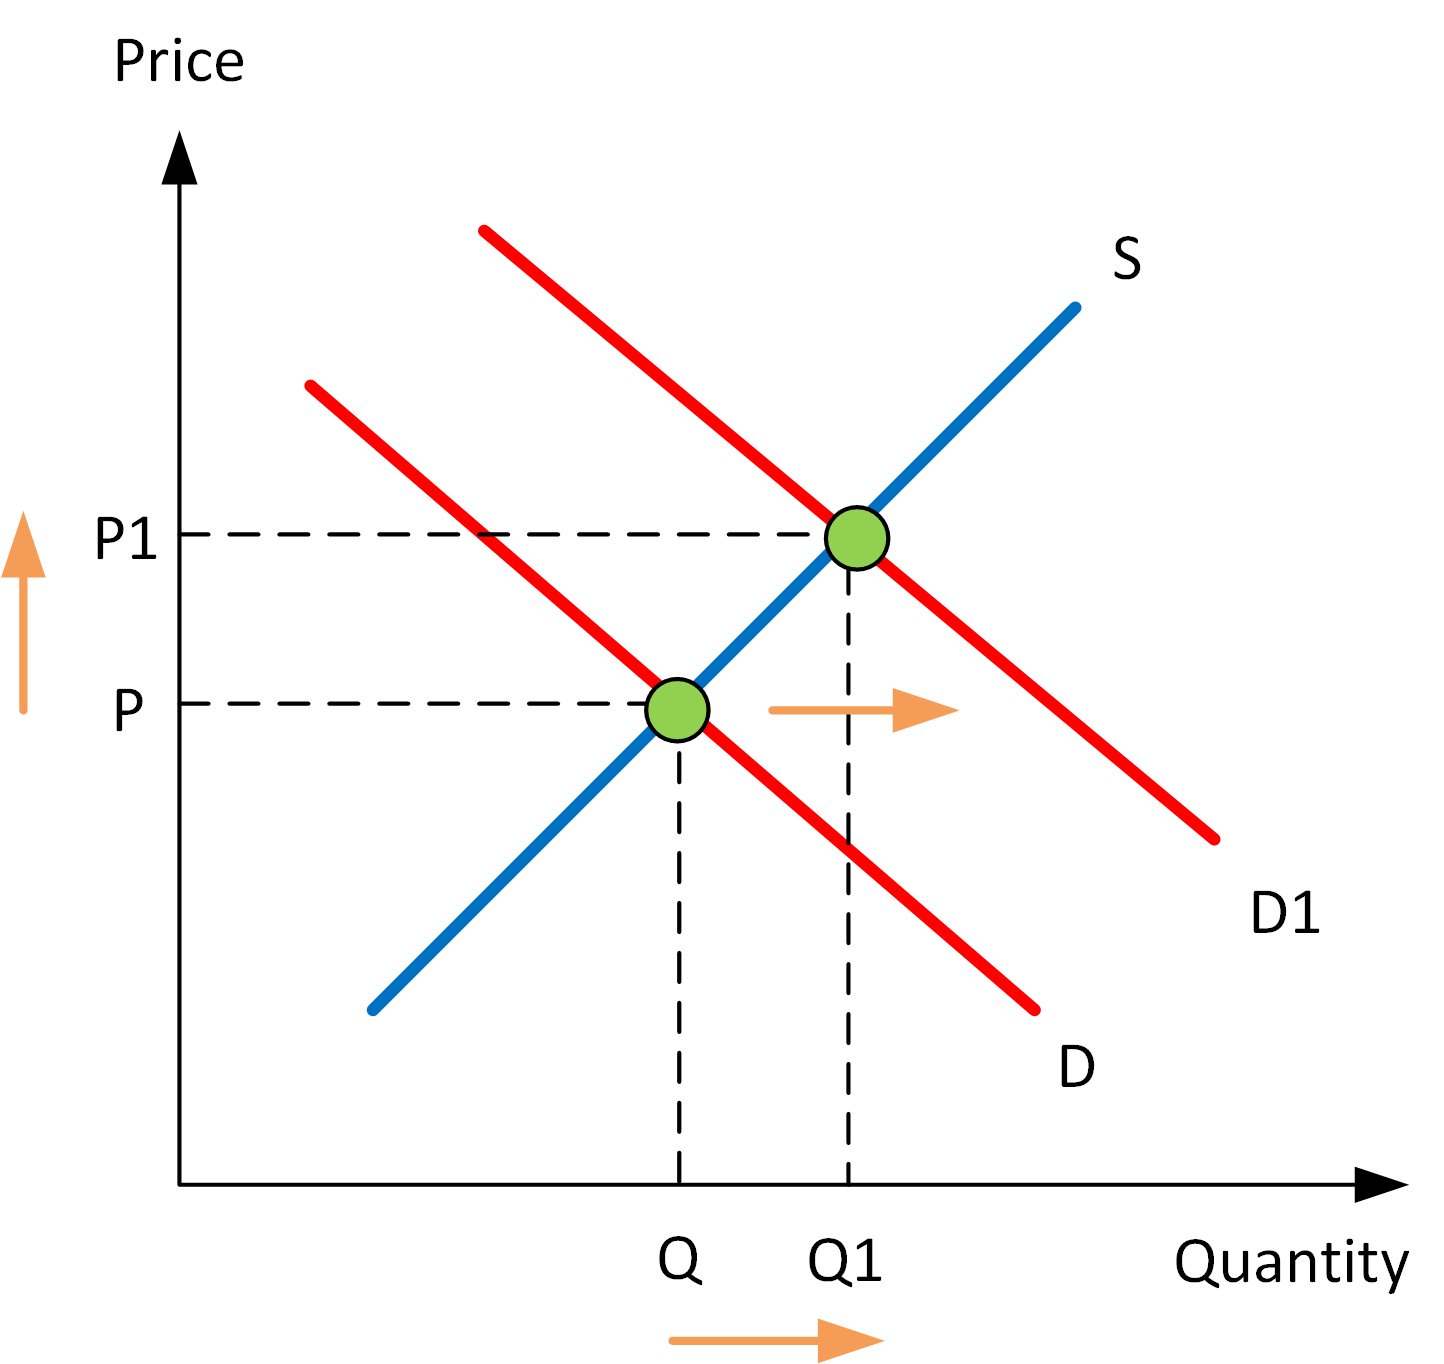 Shifting the demand curve to the right increases both the equilibrium price and quantity